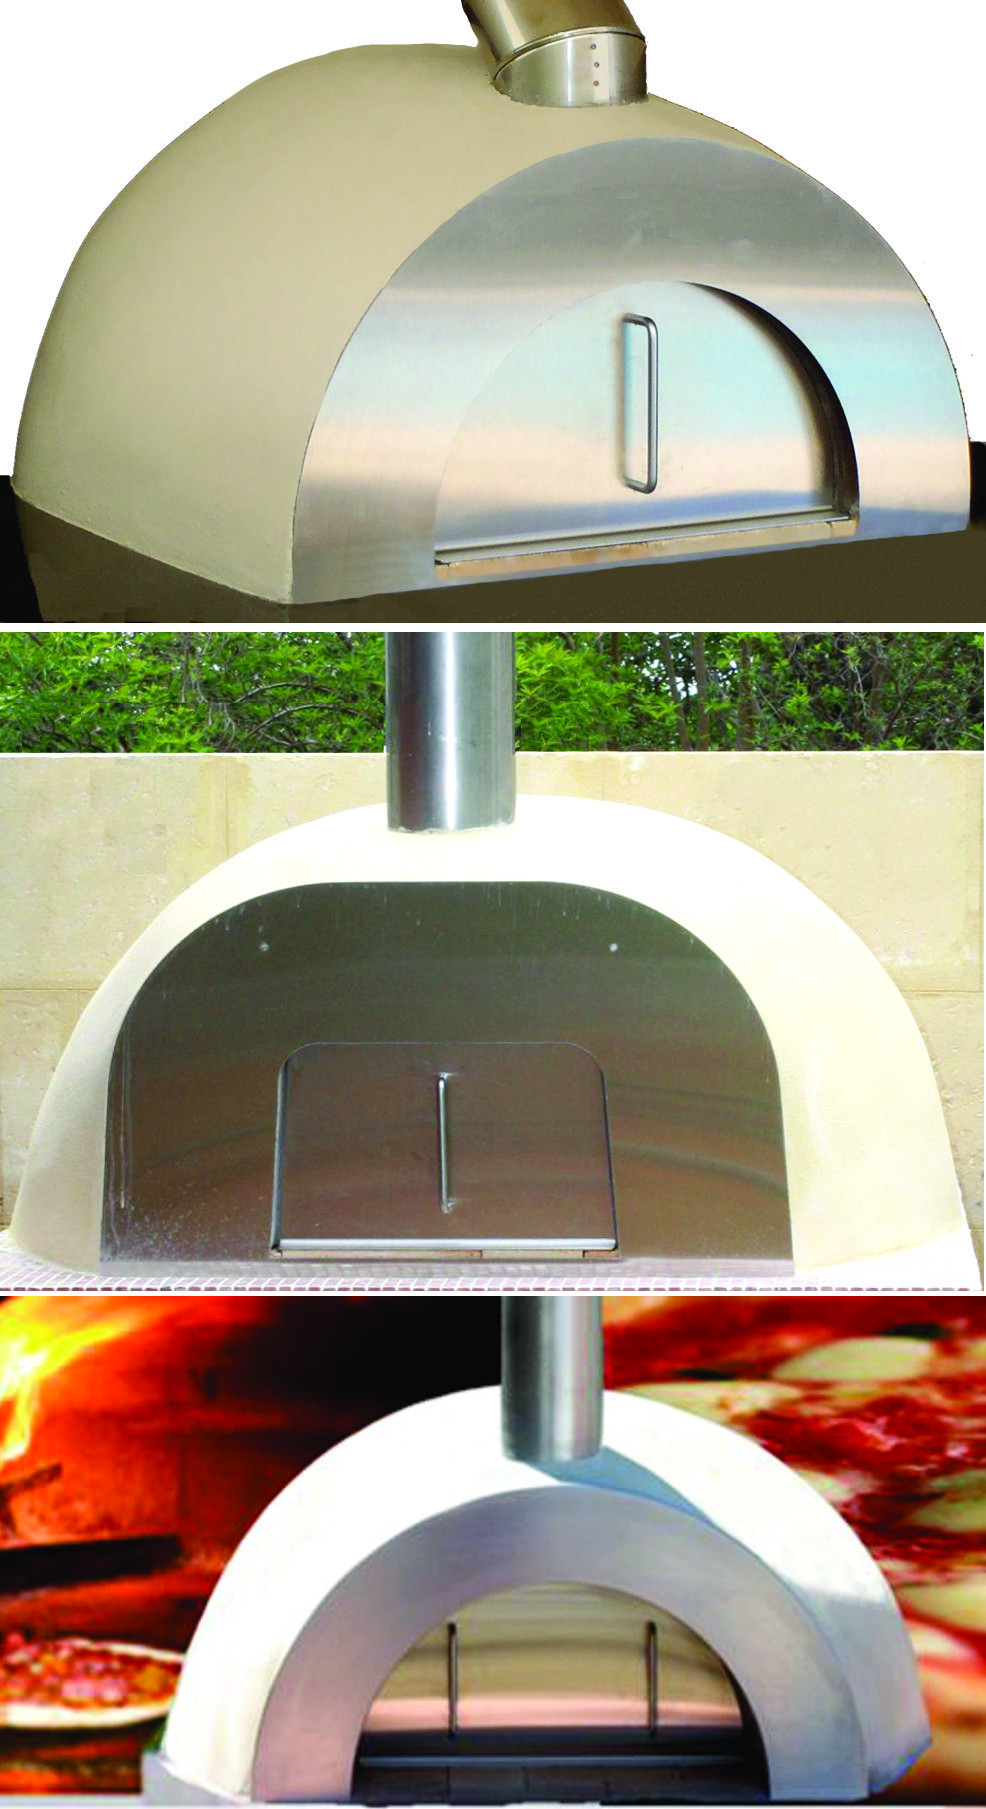 DIY Pizza Oven Kit
 Pizza Oven Kits Wood Fired Pizza Ovens